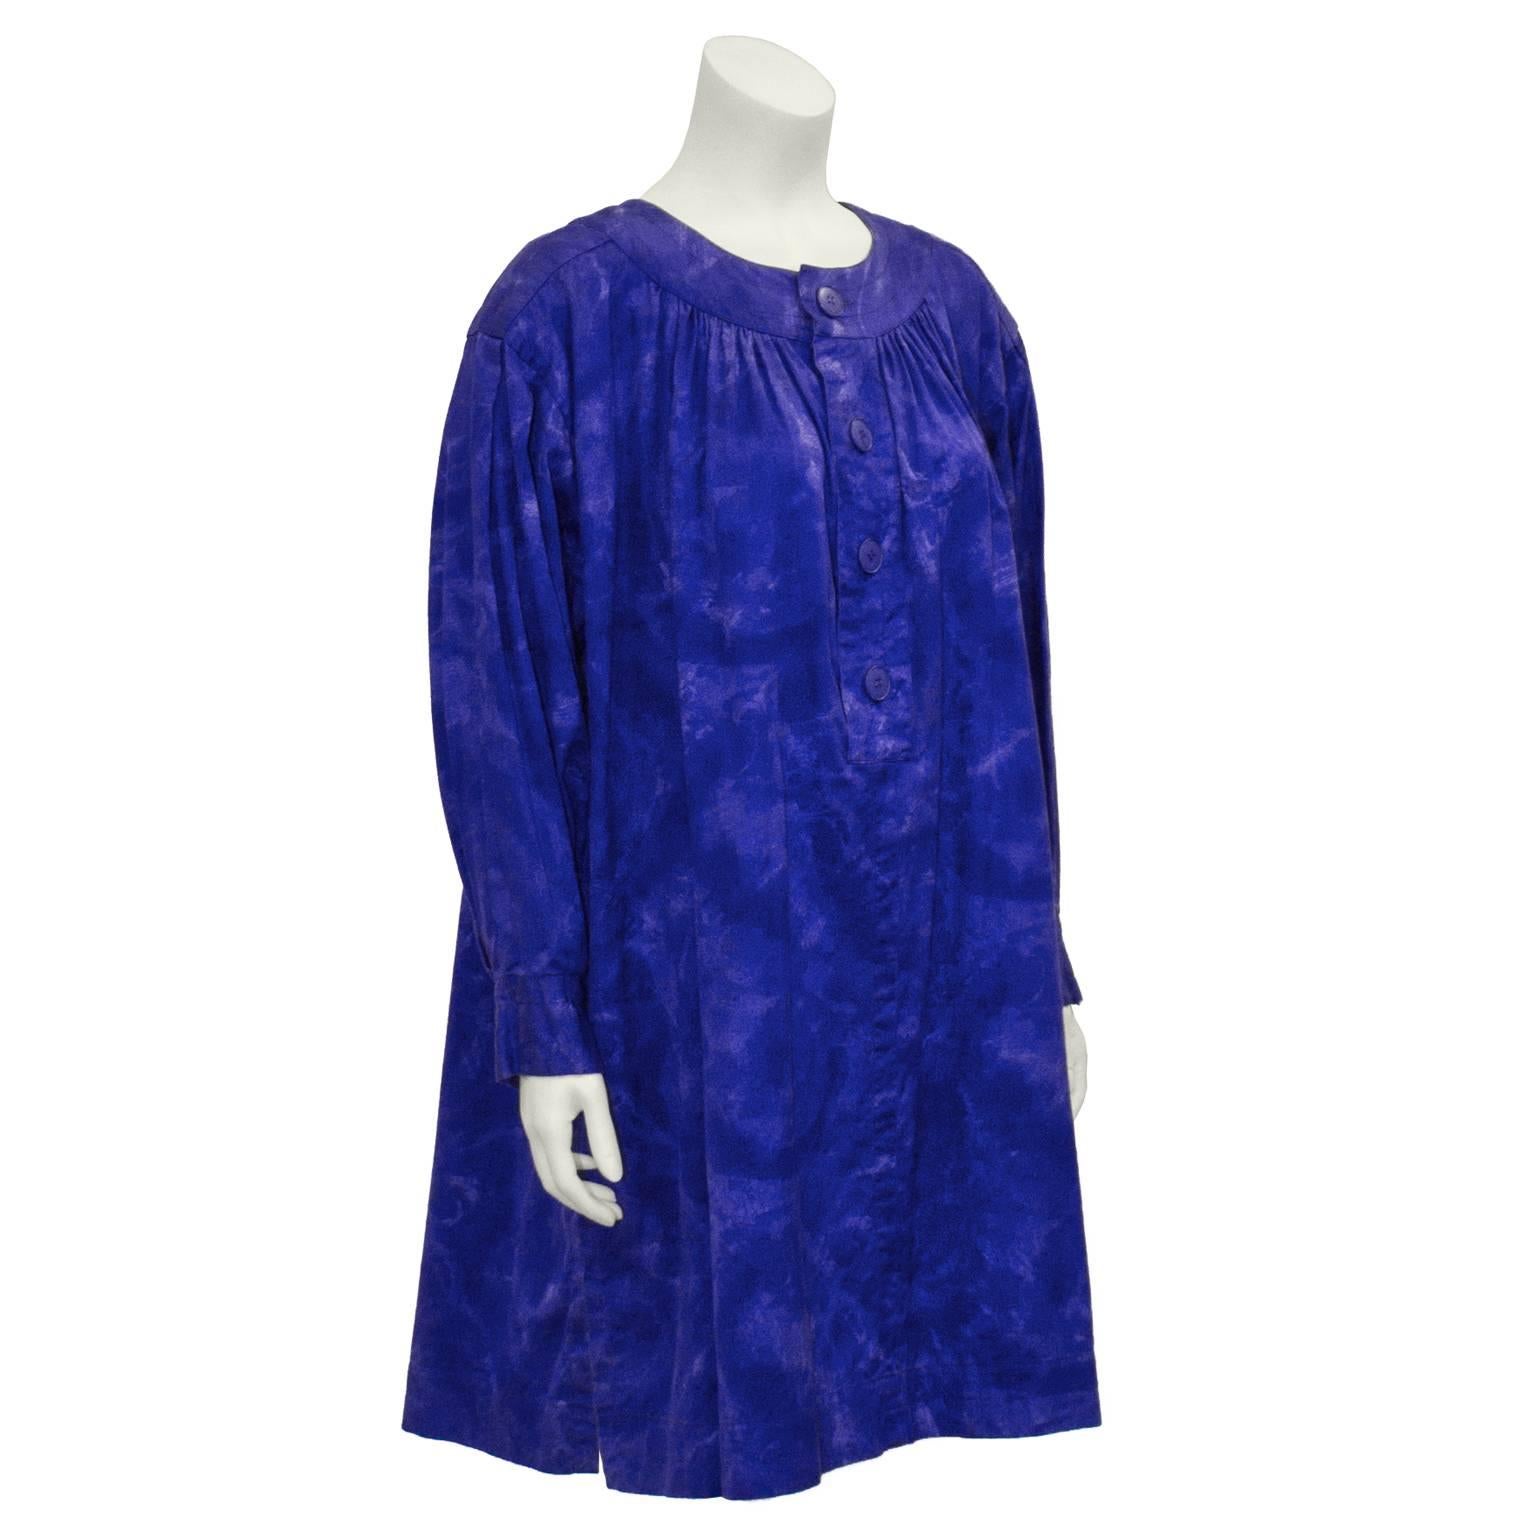 Both comfortable and chic, this Yves Saint Laurent smock dress dates from the early to mid 1980's. The loose-fitting cotton dress is in a bold indigo color that's dip dyed throughout. High scoop neck, with indigo buttons down the front placket. Long